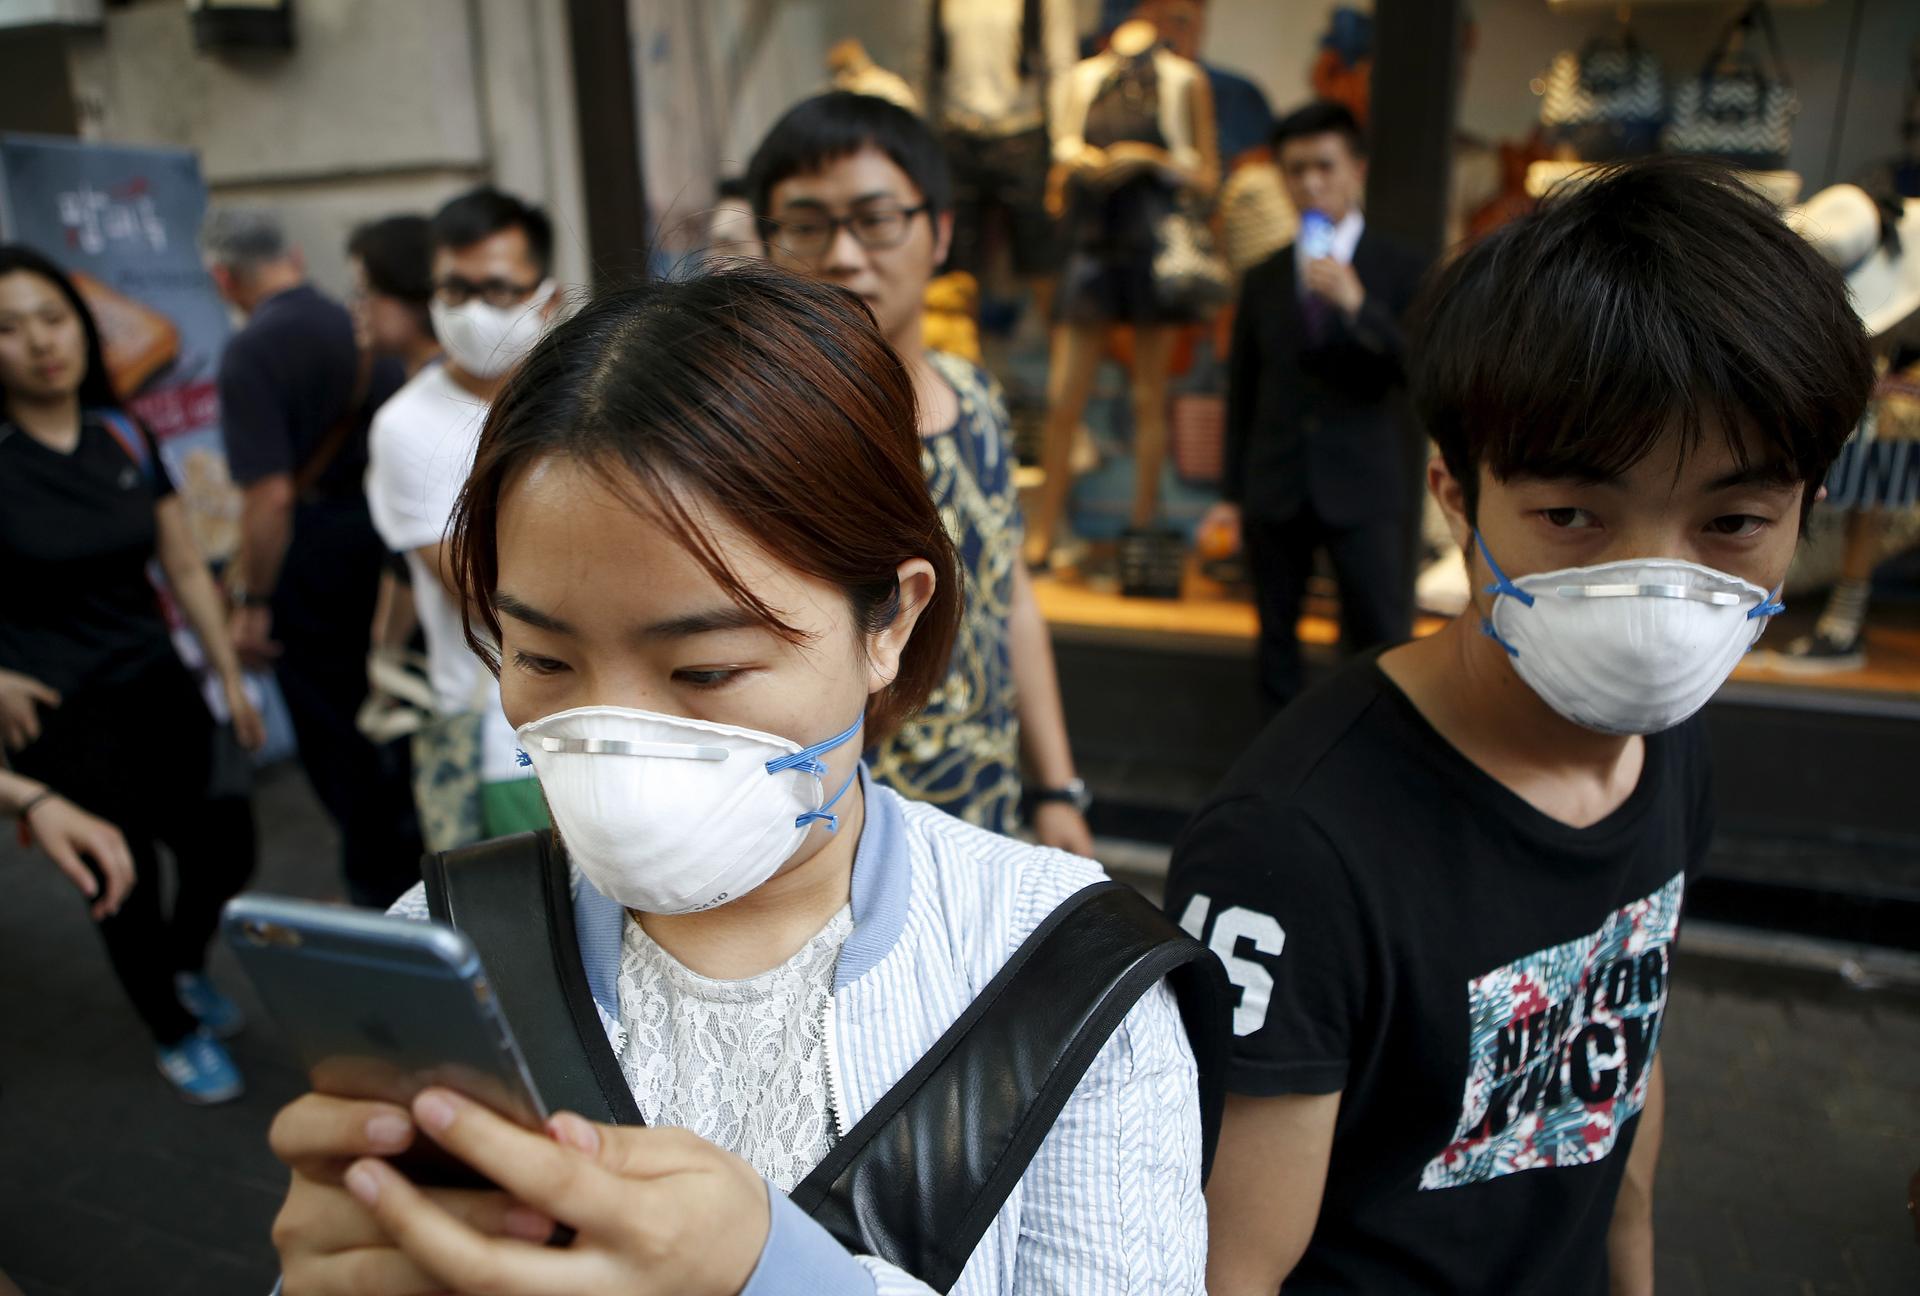 A South Korean woman wears a mask to prevent contracting Middle East Respiratory Syndrome (MERS).   Five new cases were reported by the Health Ministry on Monday, taking the total to 150, the largest outbreak outside of Saudi Arabia. The ministry also sai